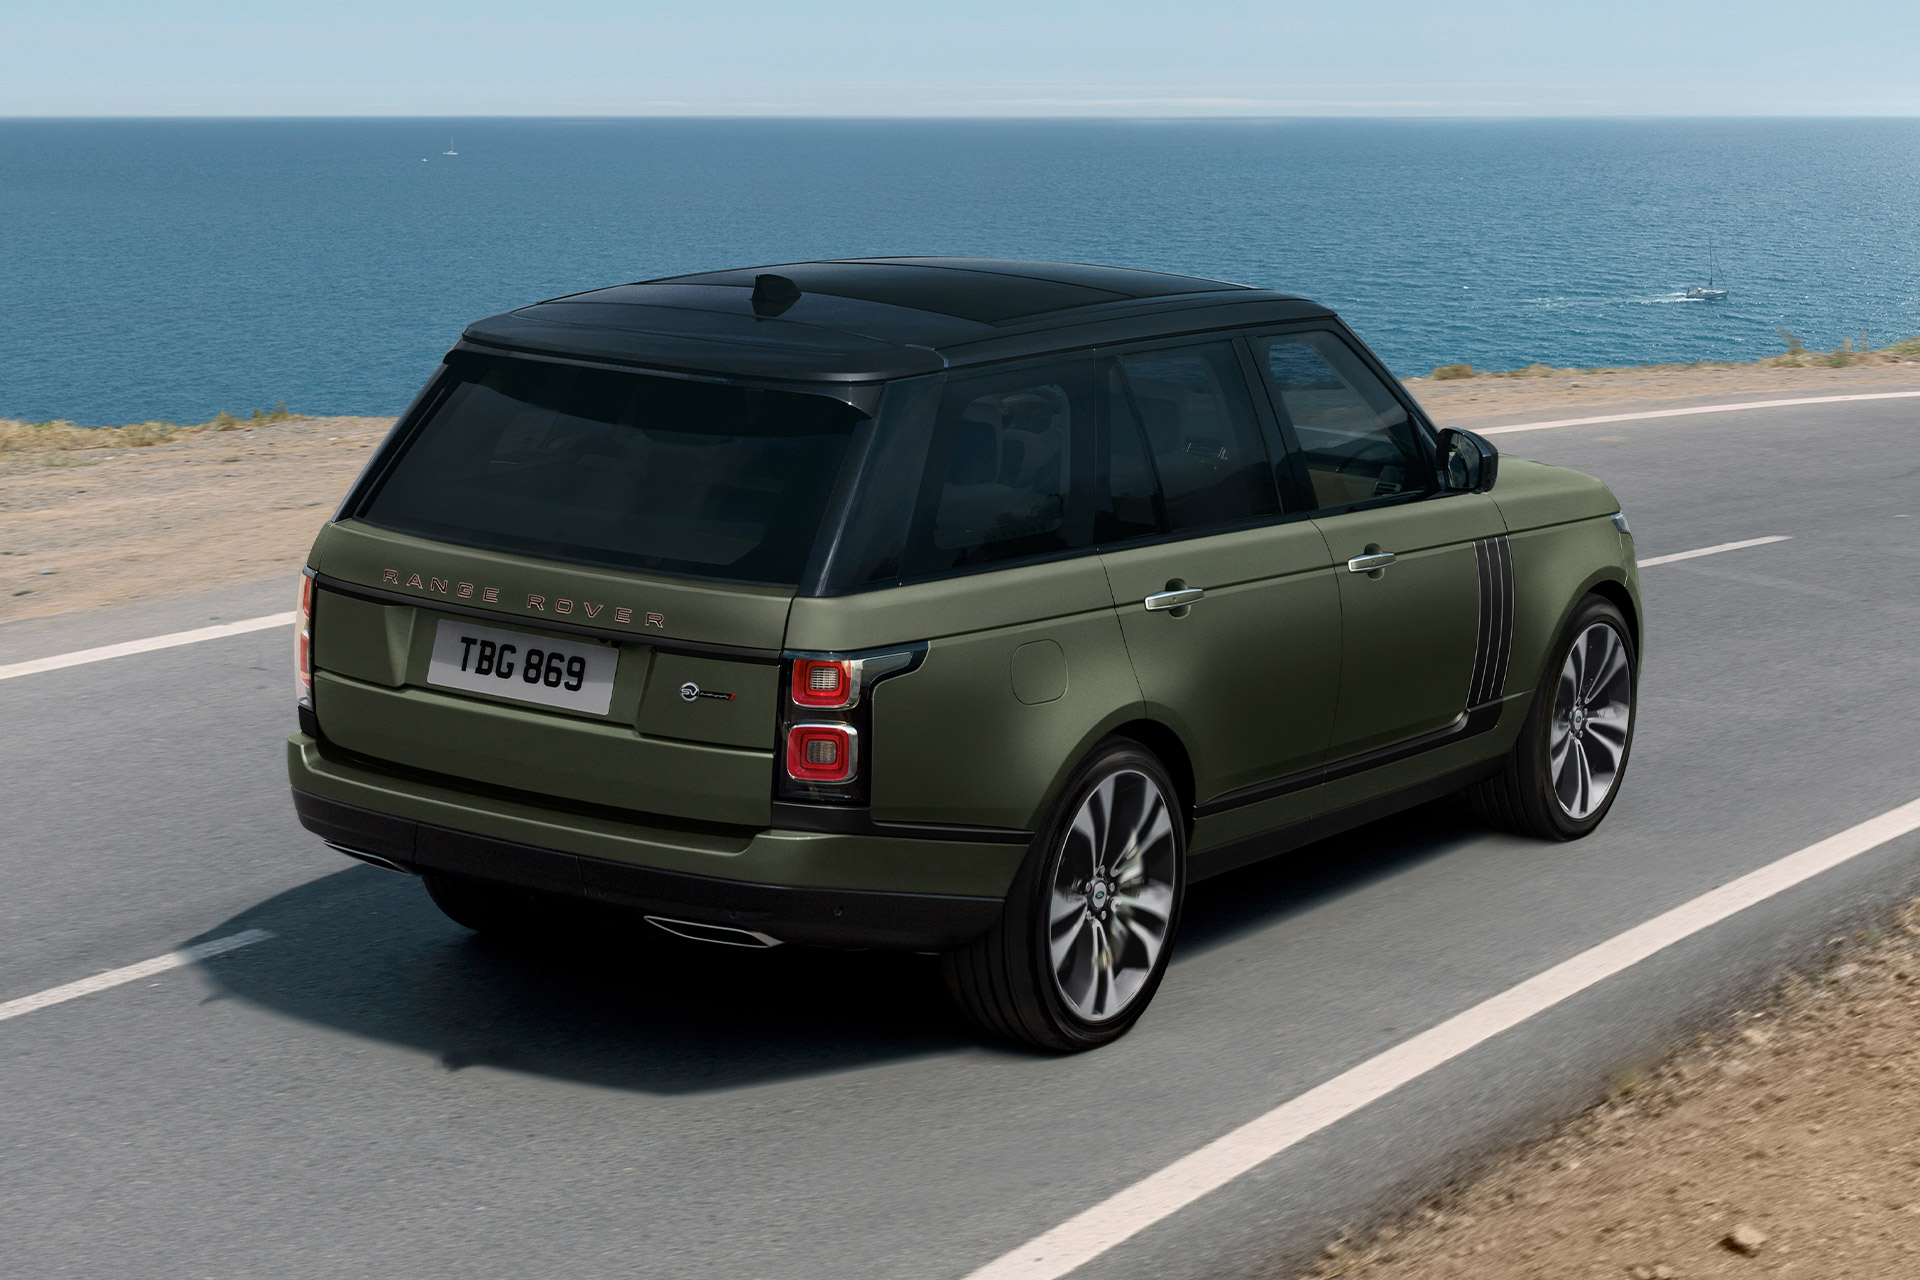 2022 Range Rover SVAutobiography Ultimate SUV | Uncrate